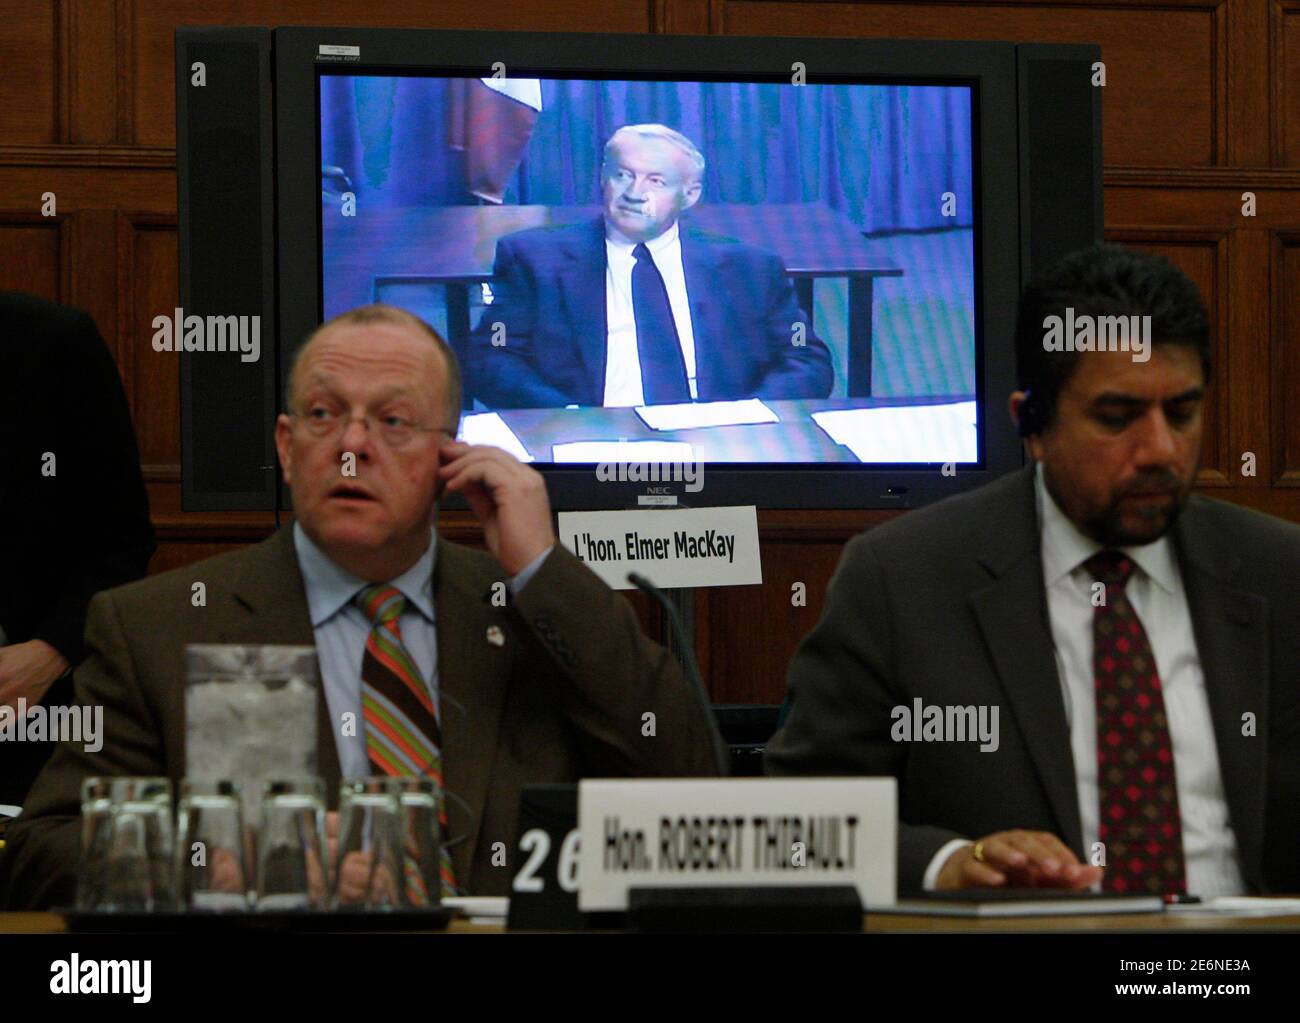 Former Progressive Conservative cabinet minister Elmer MacKay (C) waits to testify via video conference before the Commons ethics committee on Parliament Hill in Ottawa February 25, 2008. The committee is probing former Canadian Prime Minister Brian Mulroney's business dealings with German-Canadian arms dealer Karlheinz Schreiber. Also pictured are Liberal MPs Robert Thibault (L) and Sukh Dhaliwal (R). REUTERS/Chris Wattie (CANADA) Stock Photo